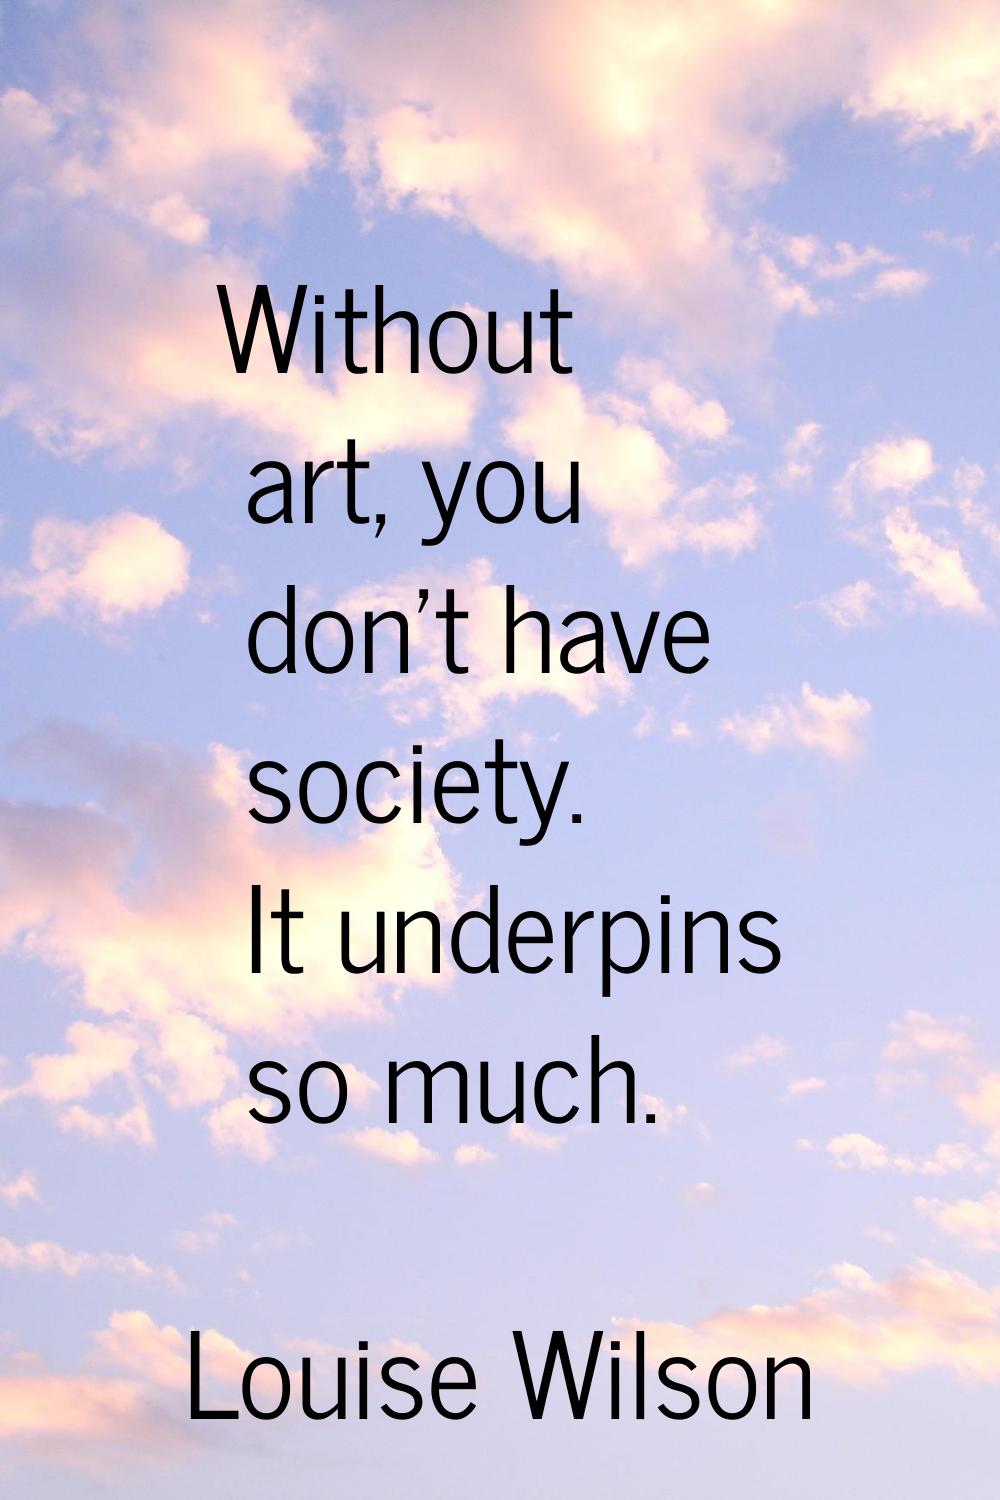 Without art, you don't have society. It underpins so much.